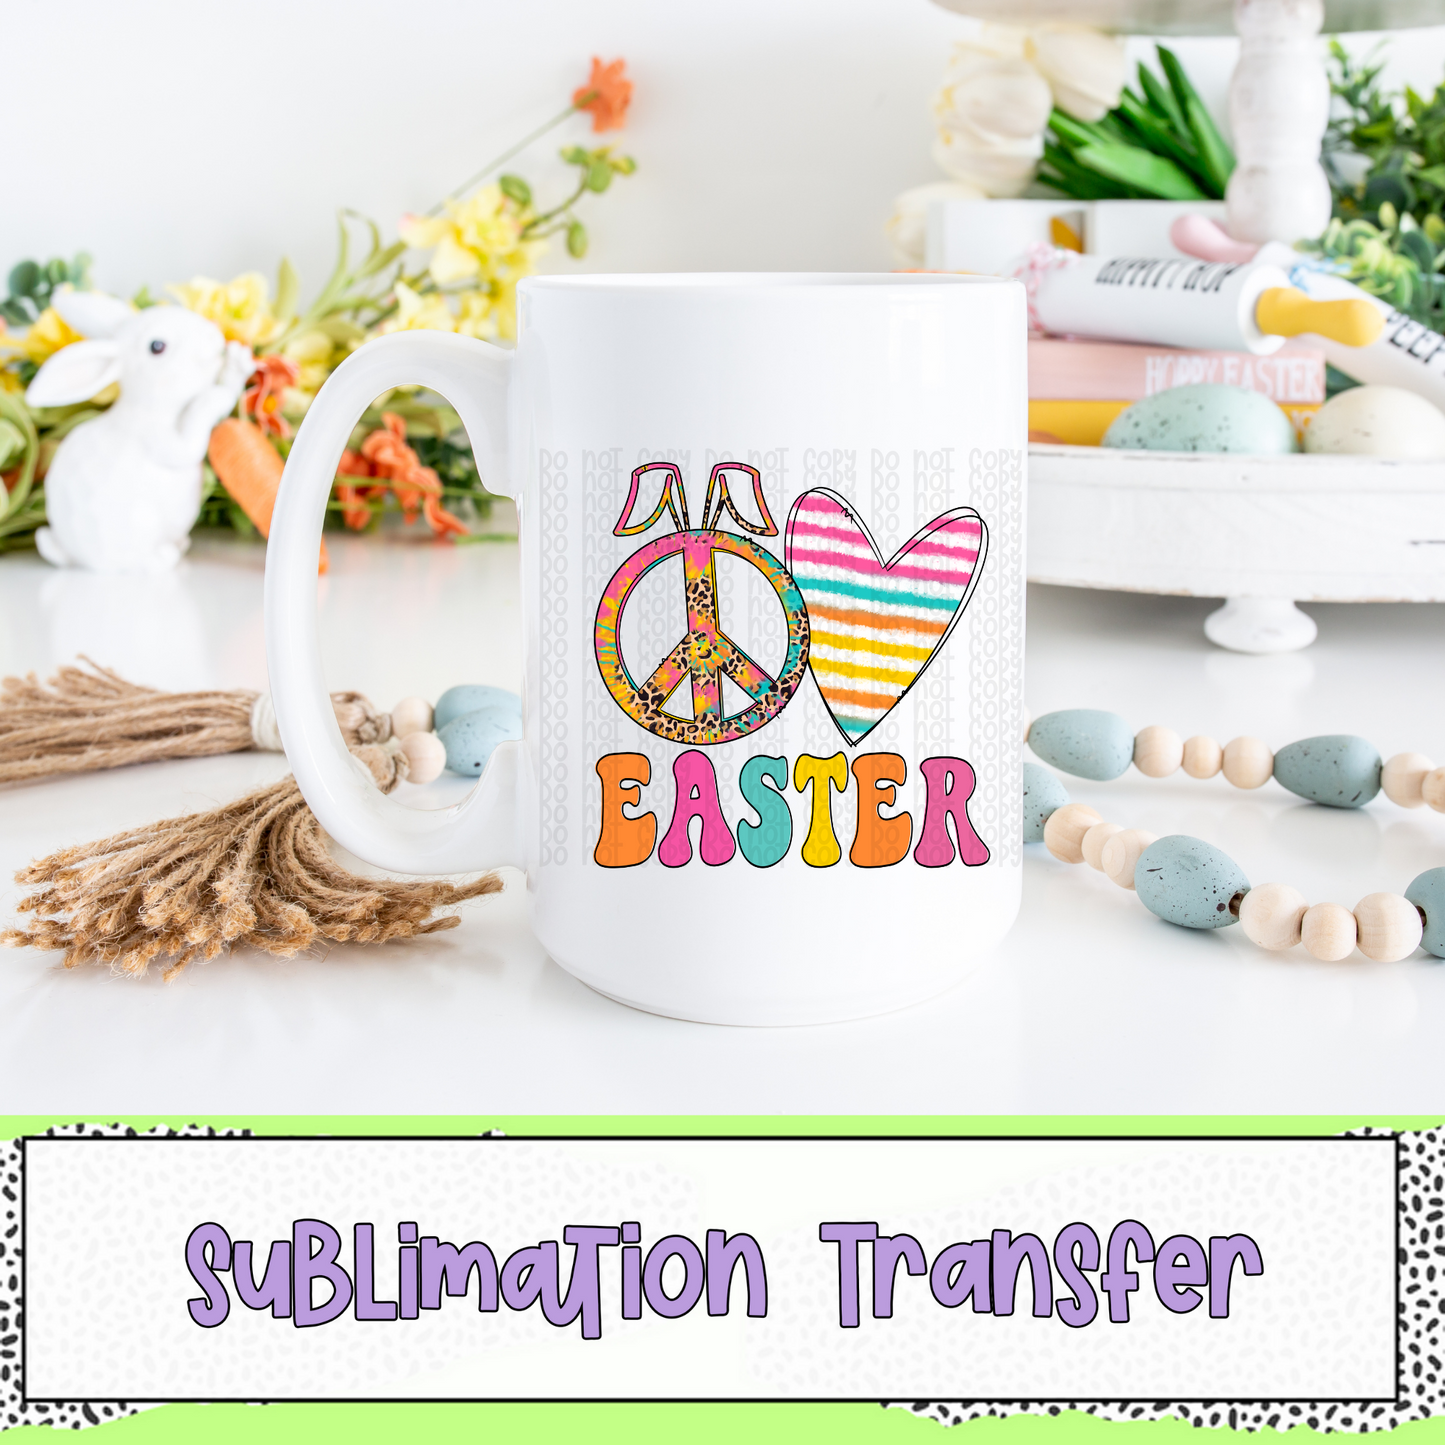 Peace Love Easter - SUBLIMATION TRANSFER